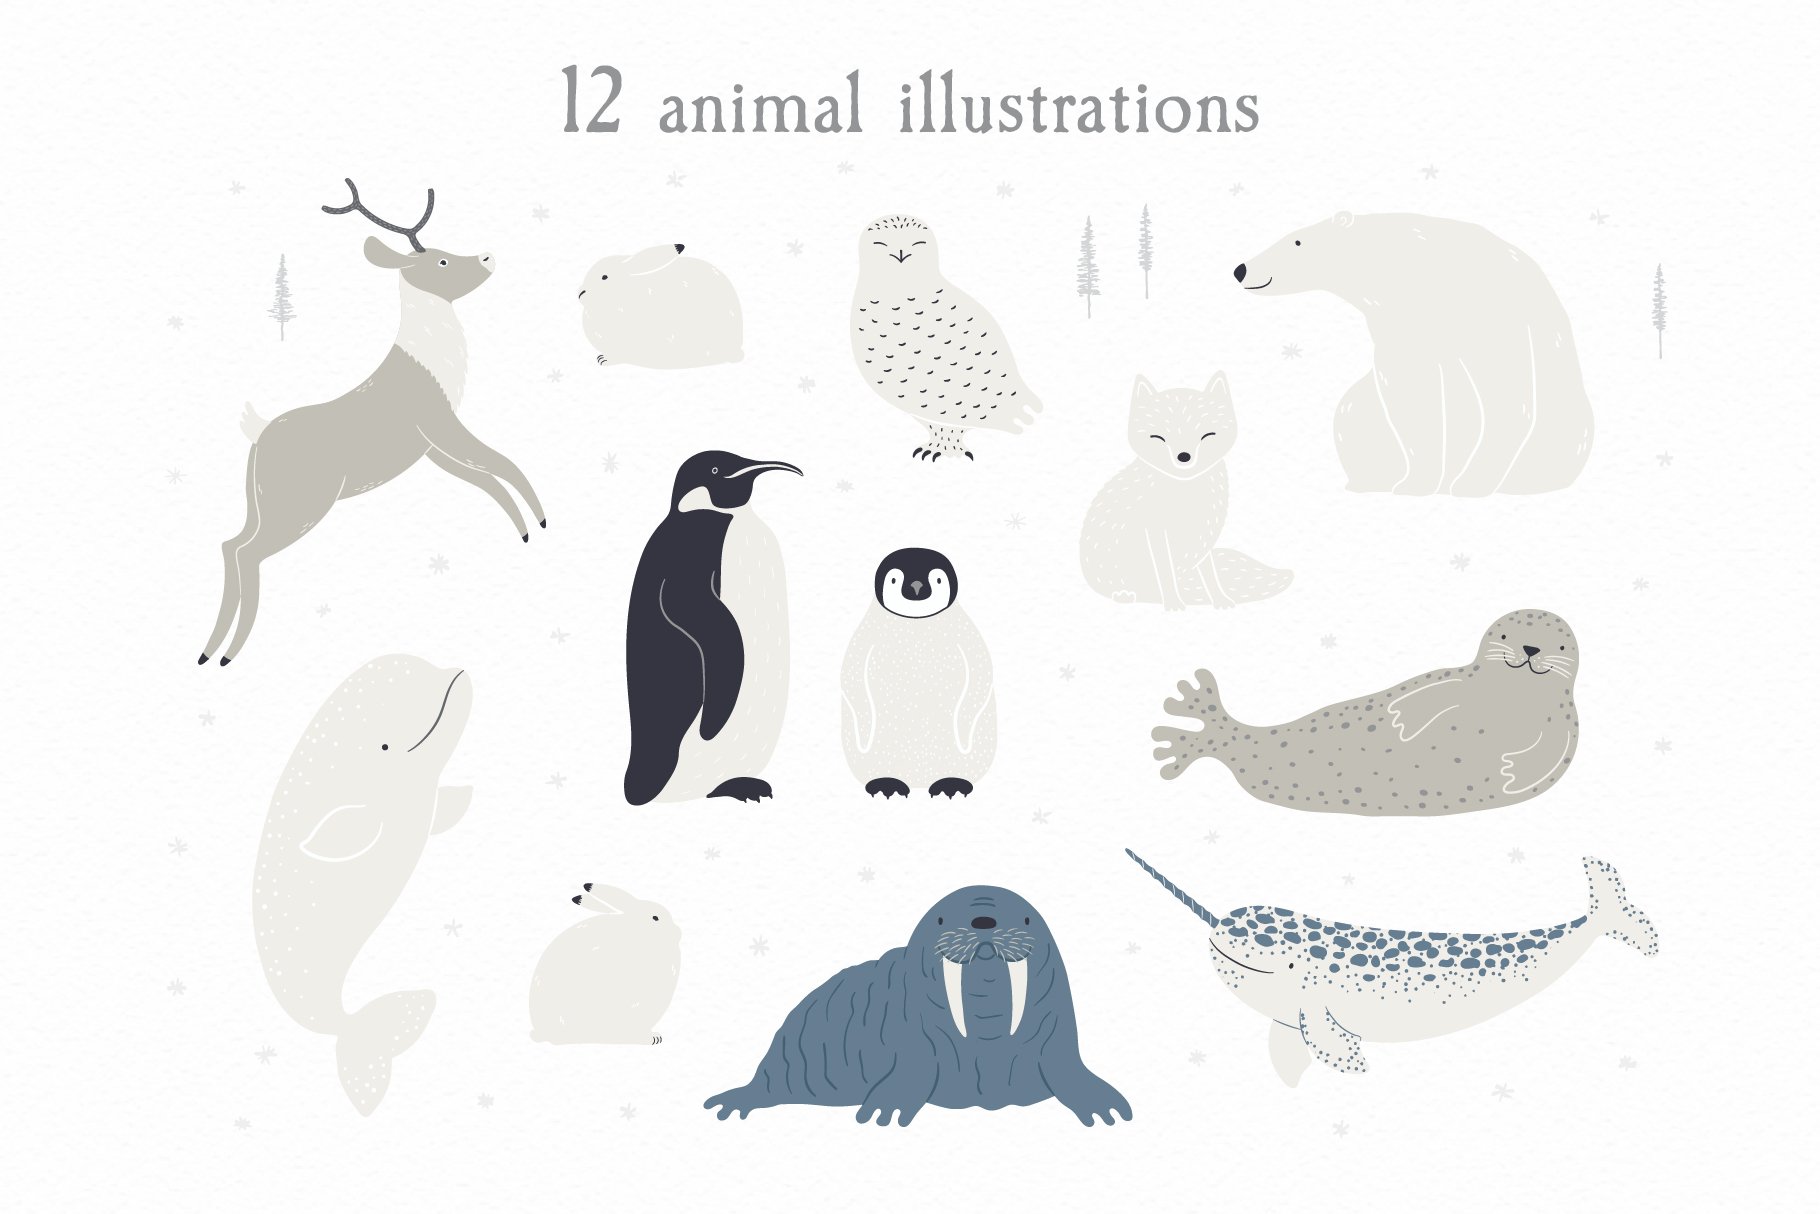 Diverse of animals for illustration.